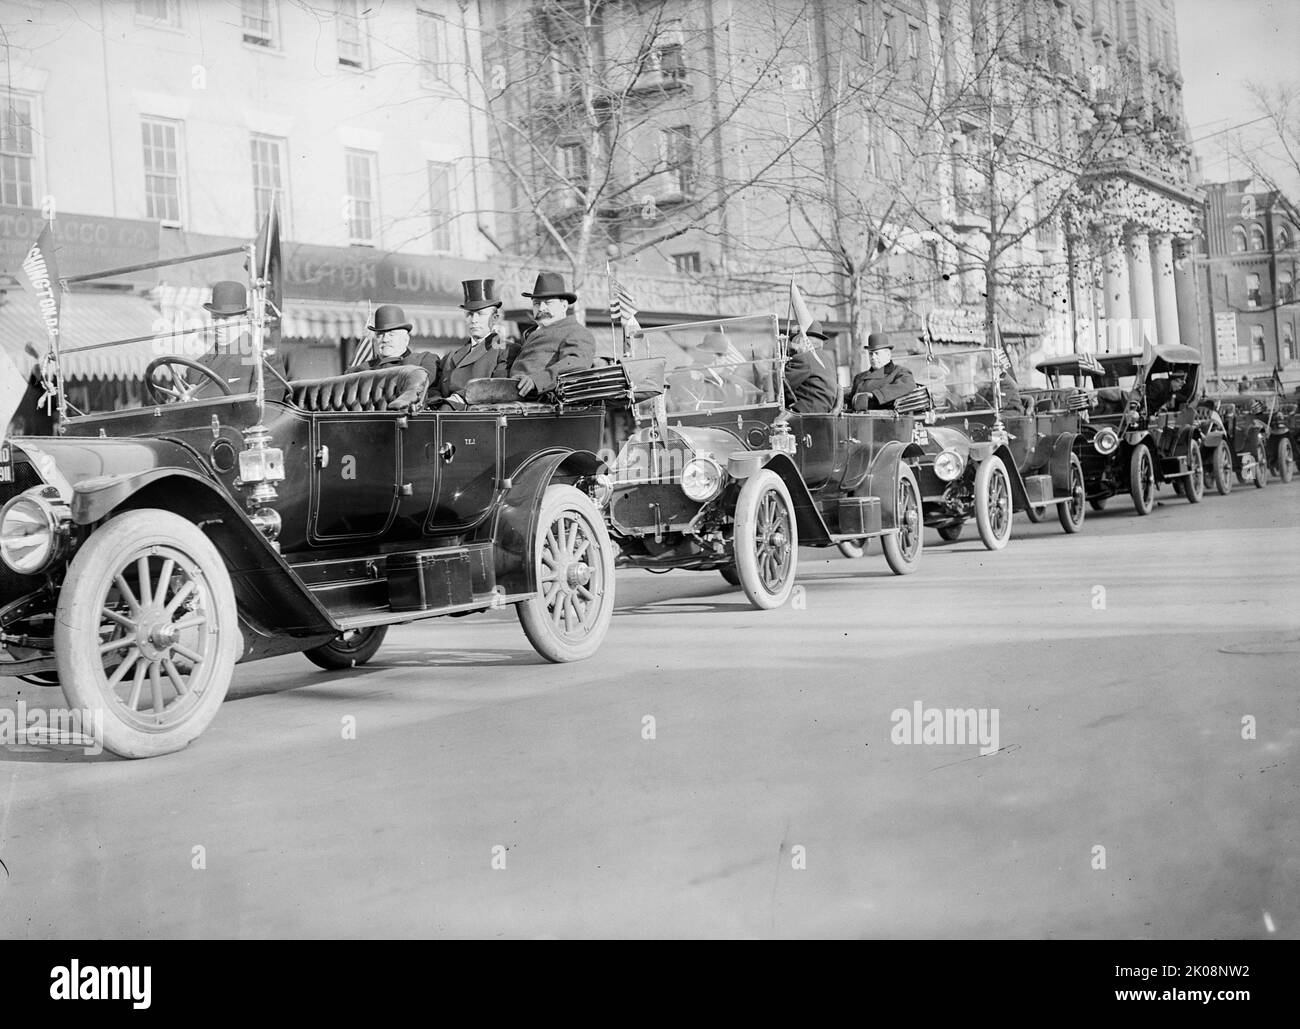 Governors of States Some Not Ident - James F. Oyster And William F. Gude of Reception Committee Are with Governor In Front Auto, 1911. [US politicians in procession]. Stock Photo